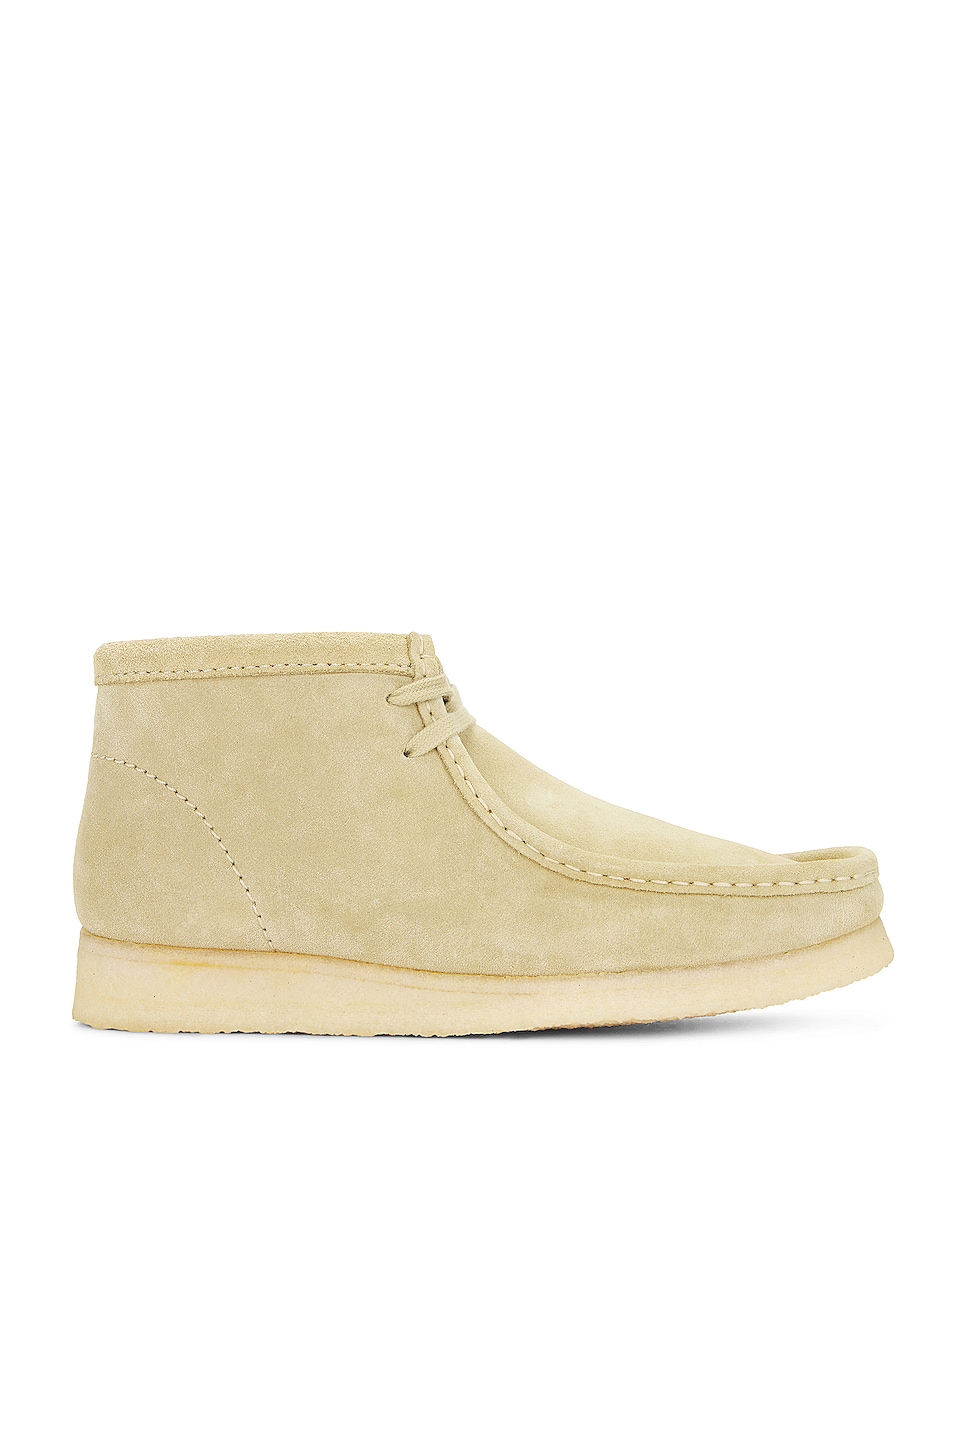 Image 1 of Clarks Wallabee Boot in Maple